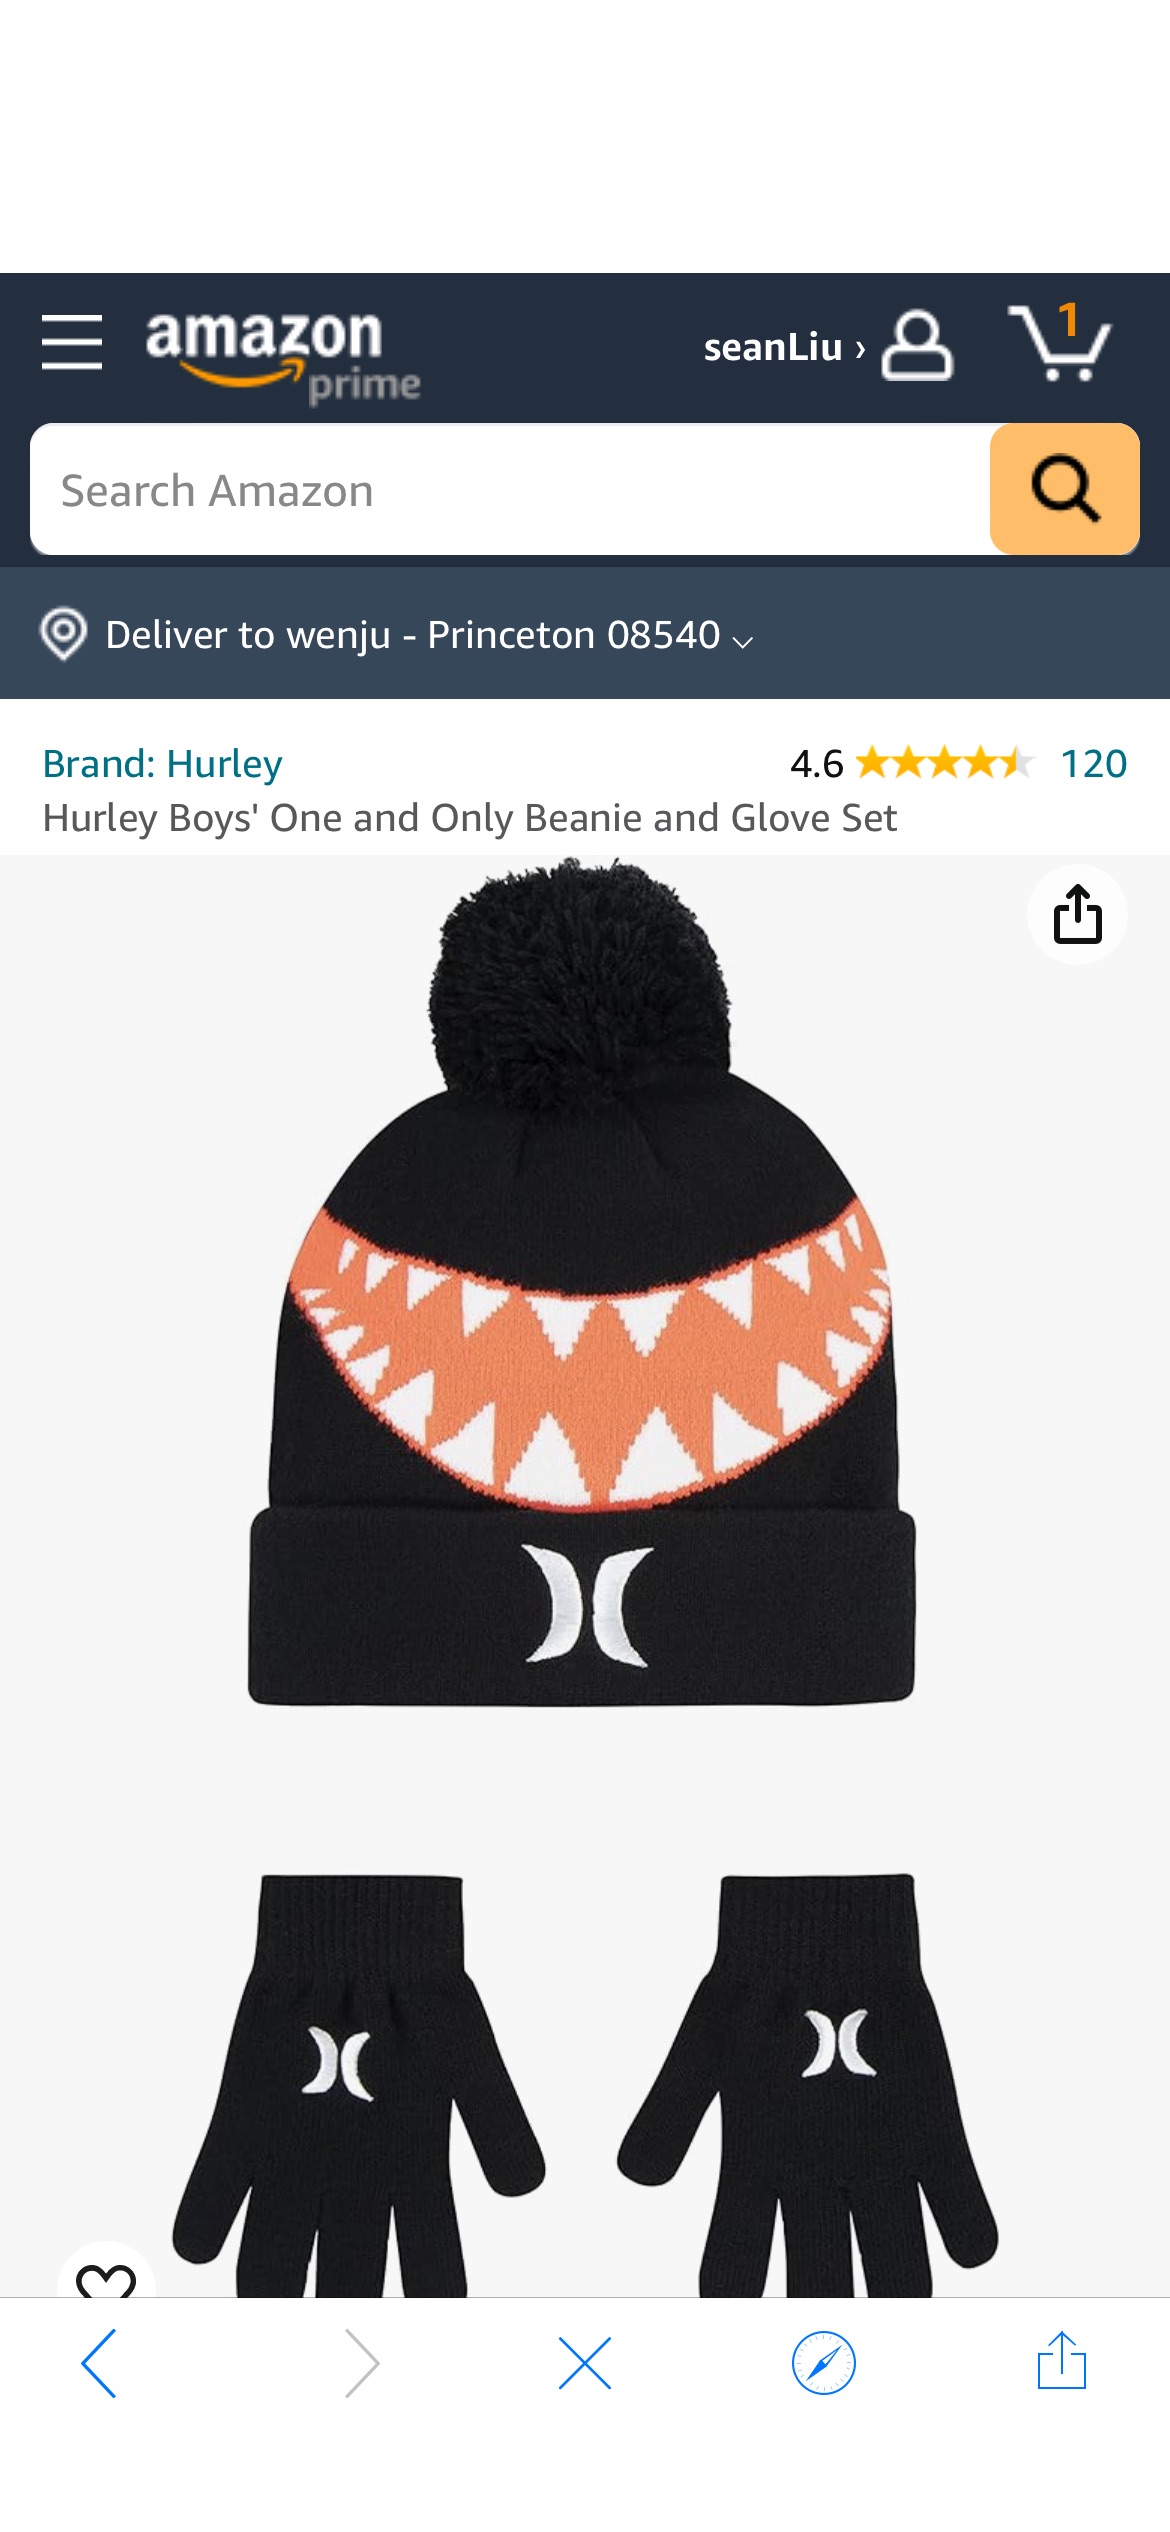 Amazon.com: Hurley Boys Beanie and Glove Set, Black/Red, One Size